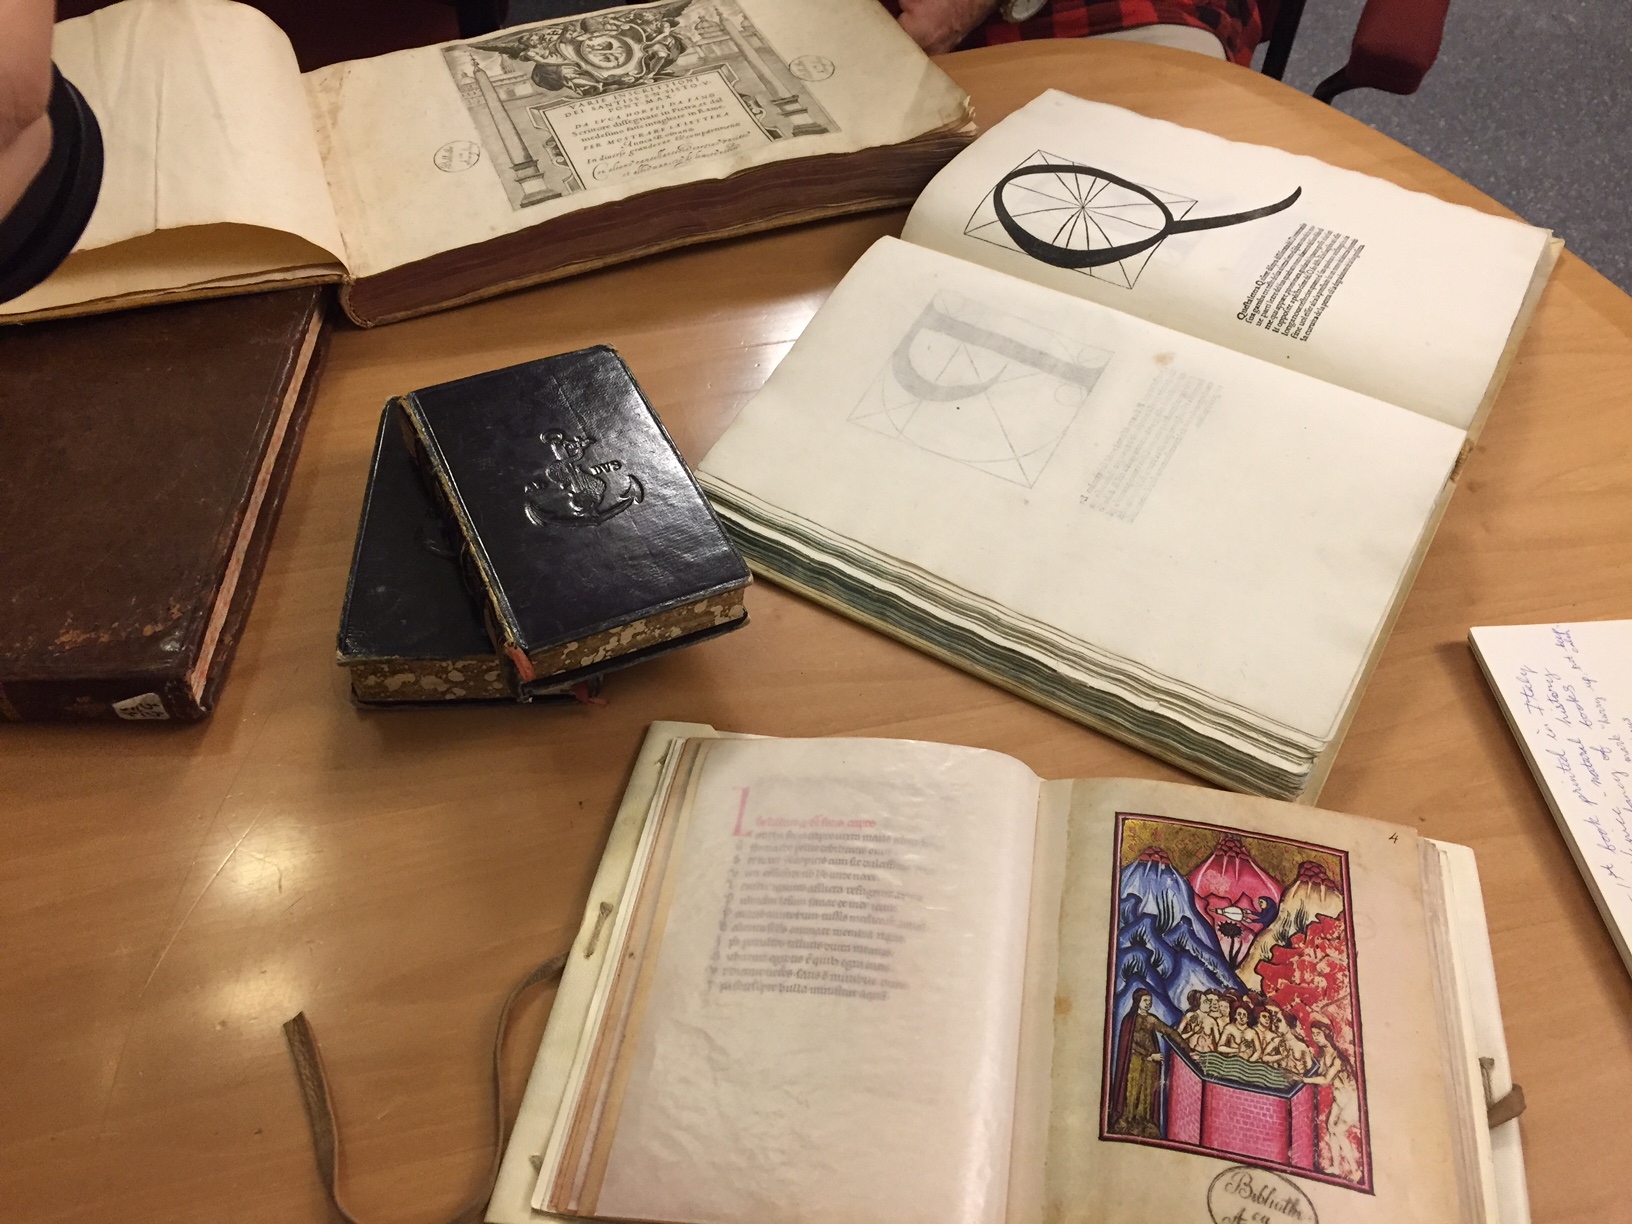 Old books depicting letter calligraphy and colorful hand drawings. There are some old, cover embossed notebooks on the desk as well.